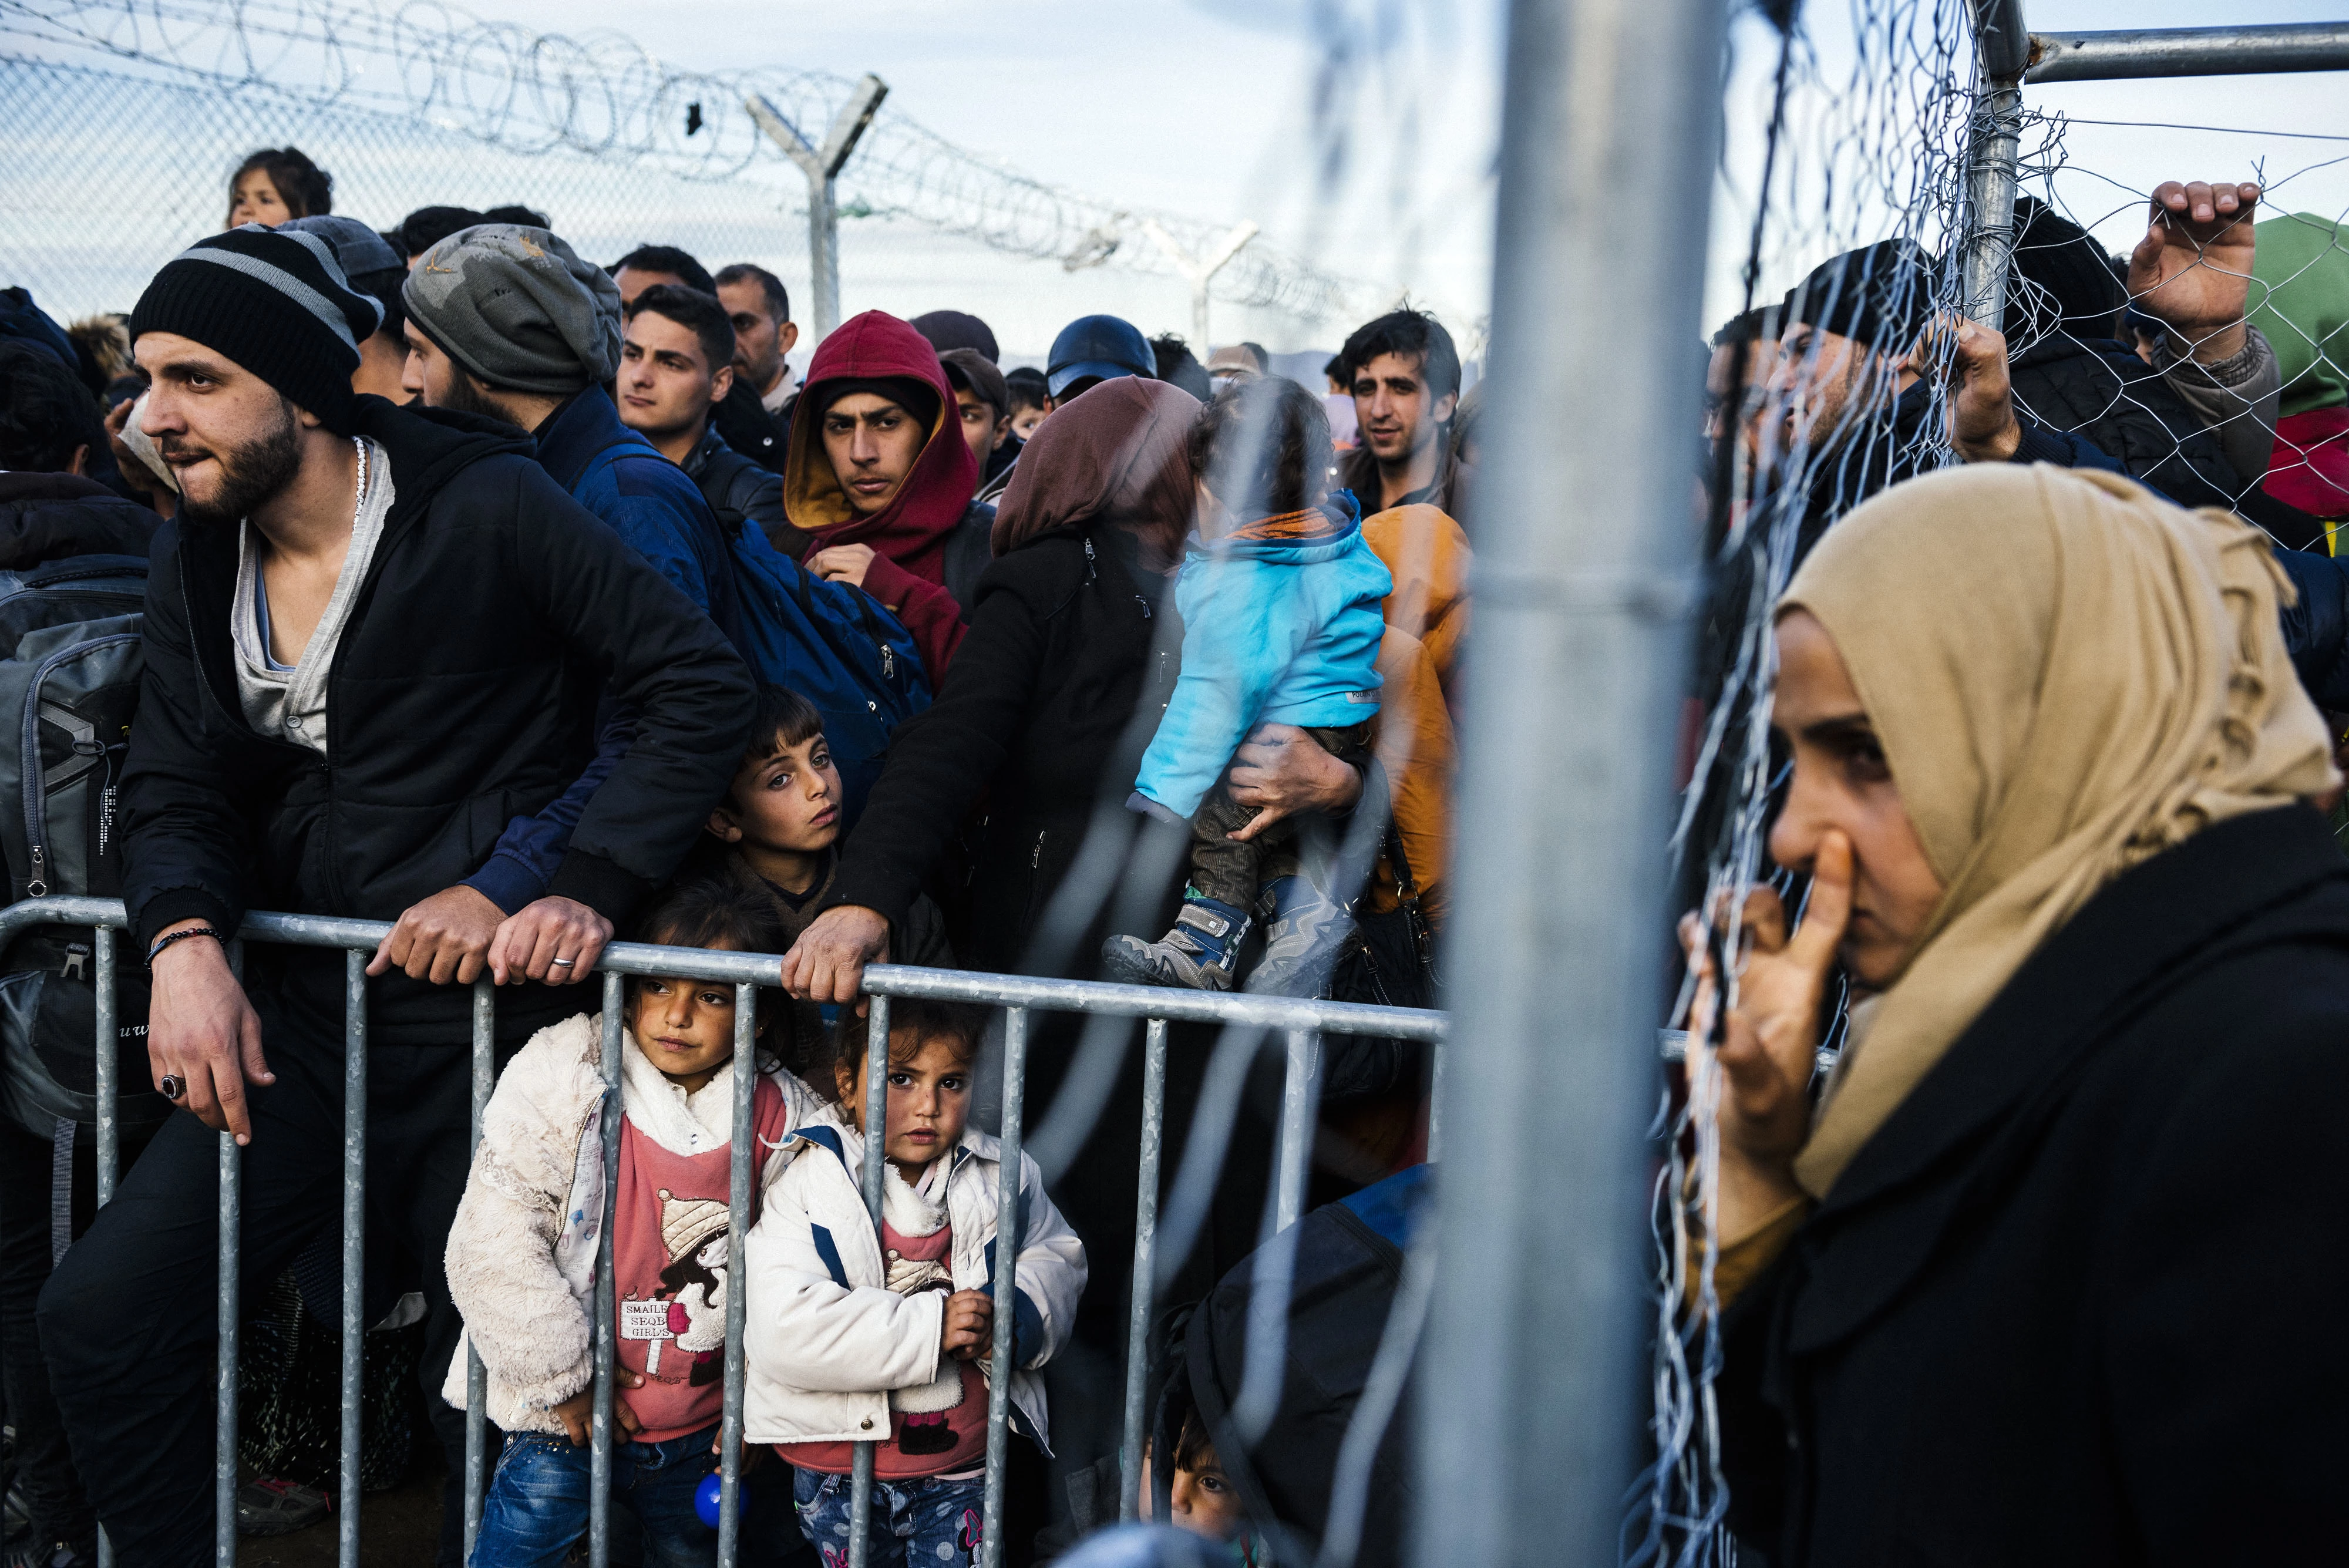 TOPSHOT - Migrants and refugees gather close to the gate at the Greek-Macedonian border near the Greek village of Idomeni, on March 5, 2016, where thousands of people wait to cross the border into Macedonia.<br />  Some 13,000 refugees are crammed in unhygienic conditions on Greece's border with Macedonia, officials said on March 5, 2016, with all eyes on a key EU-Turkey summit on March 7 that is seen as the only viable solution to the crisis. / AFP / DIMITAR DILKOFF        (Photo credit should read DIMITAR DILKOFF/AFP/Getty Images)